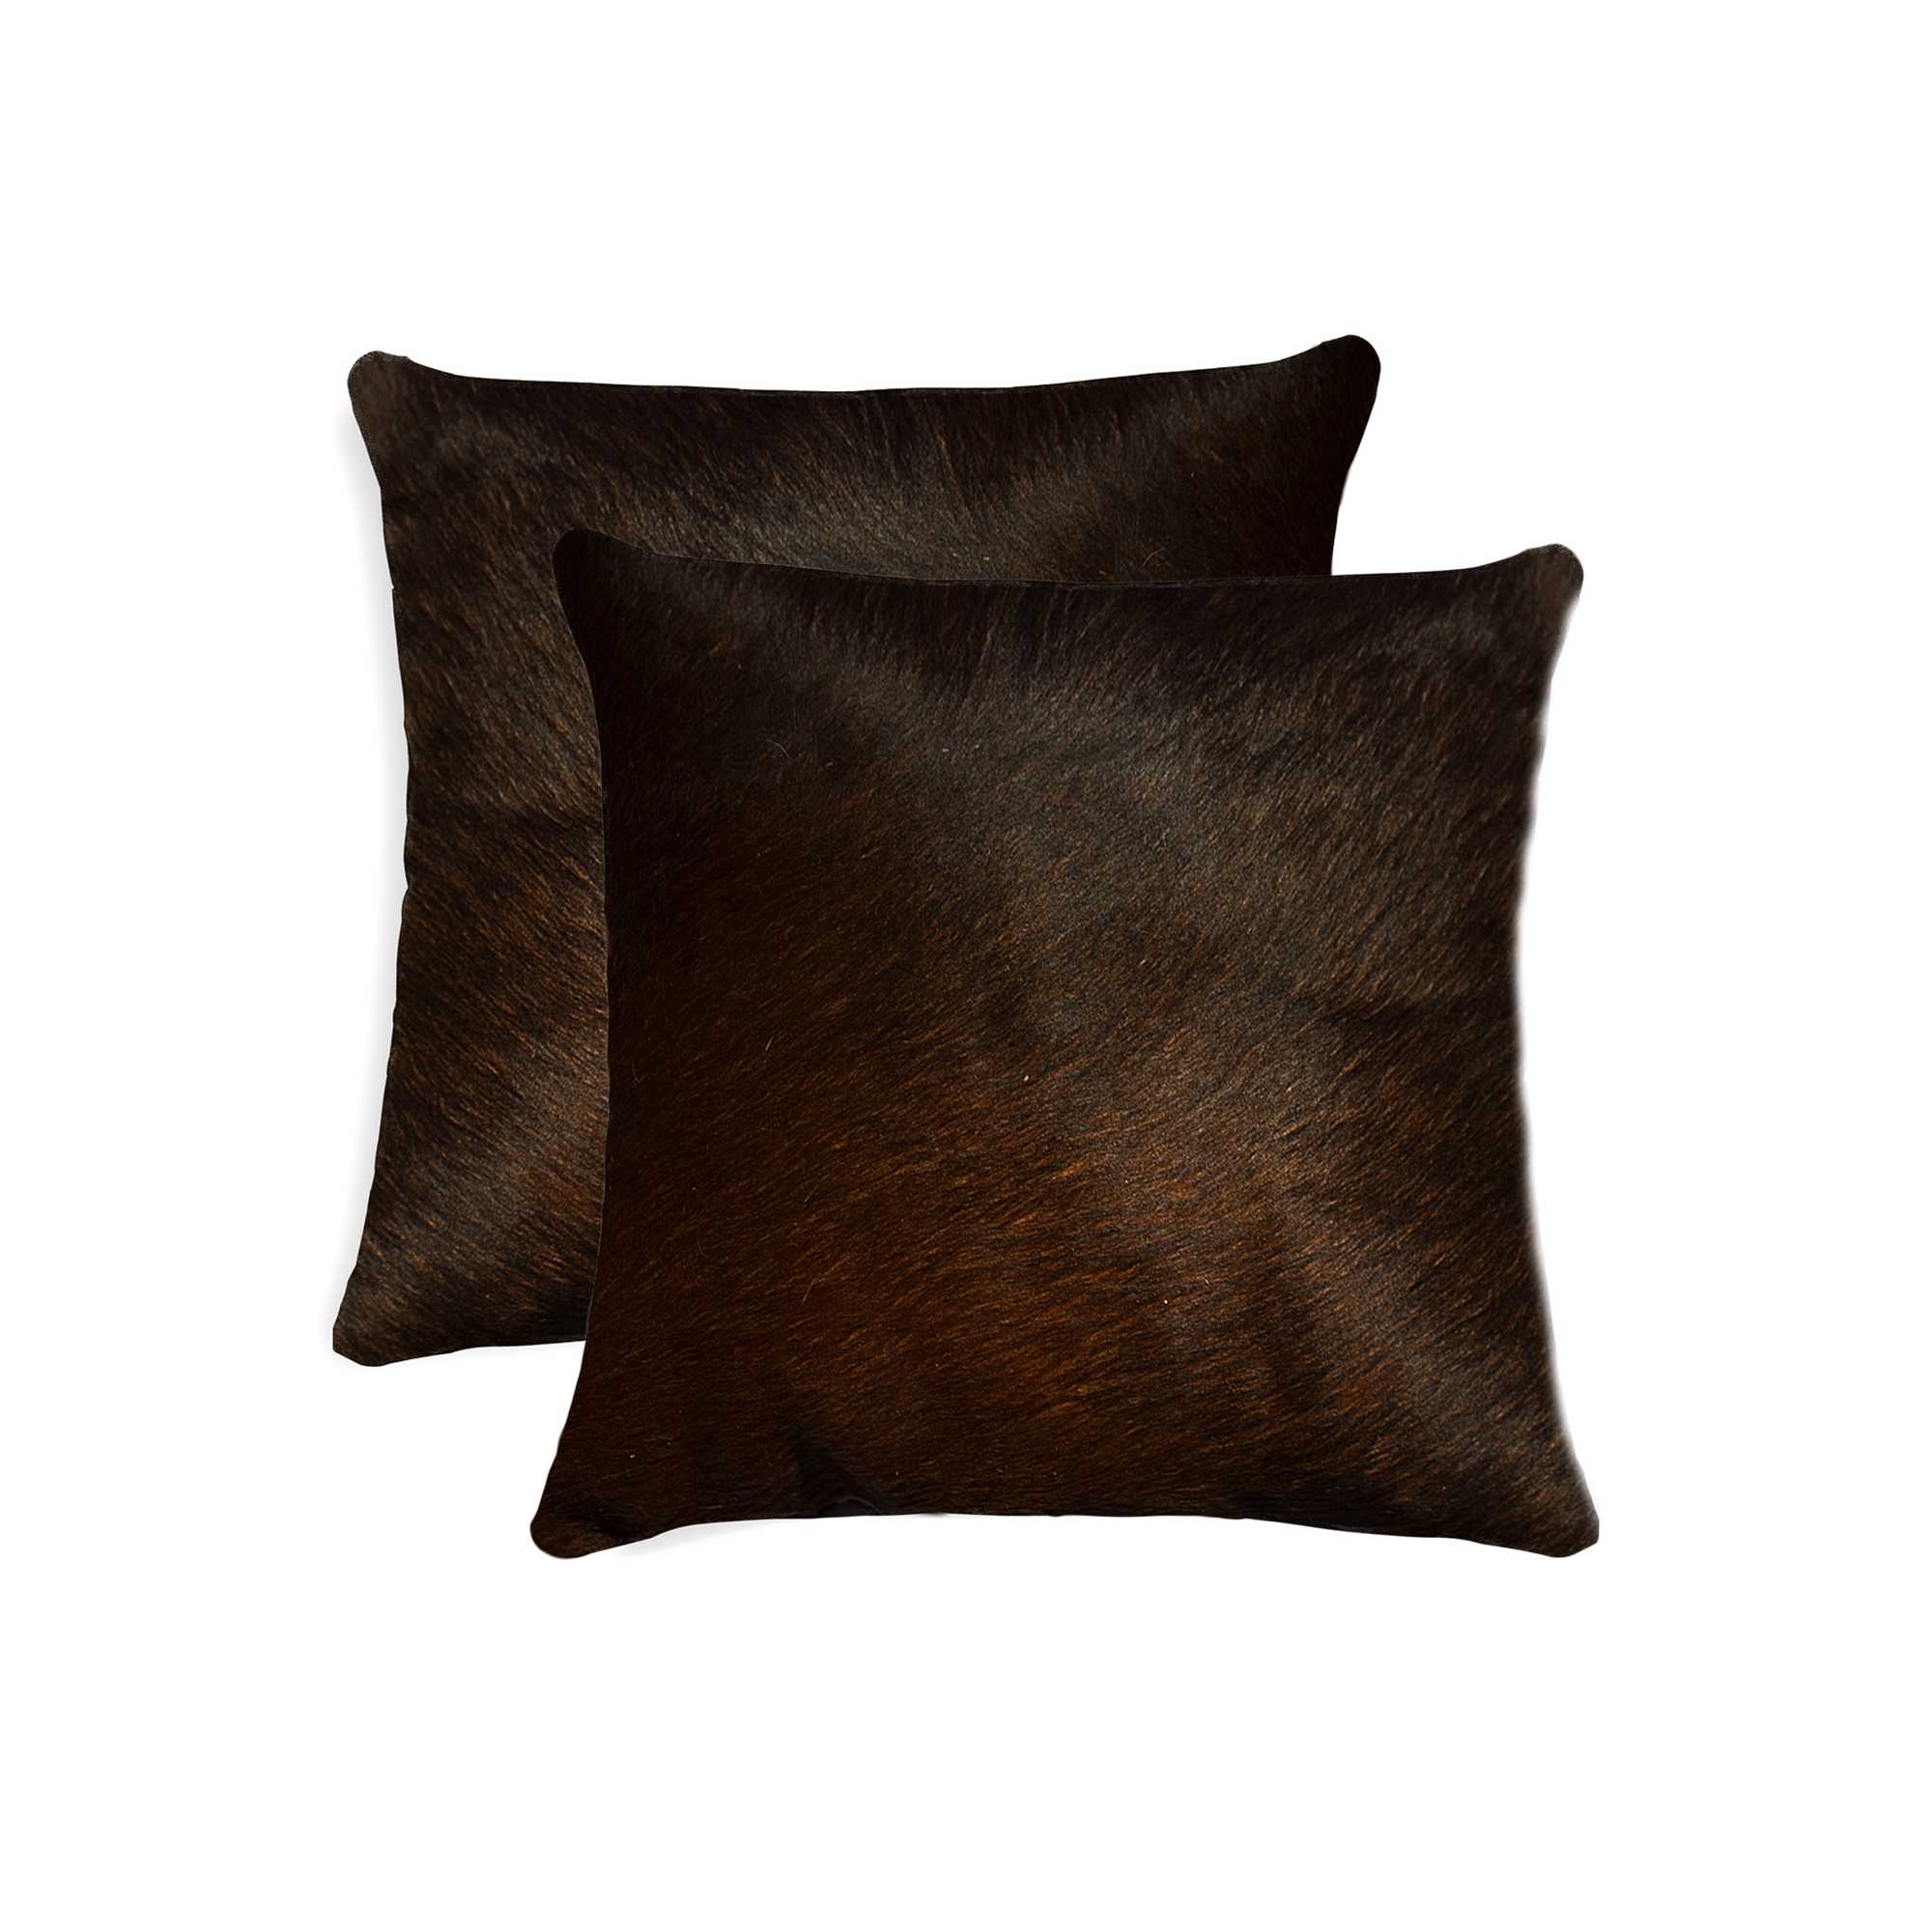 18" x 18" x 5" Chocolate, Cowhide - Pillow 2 Pack